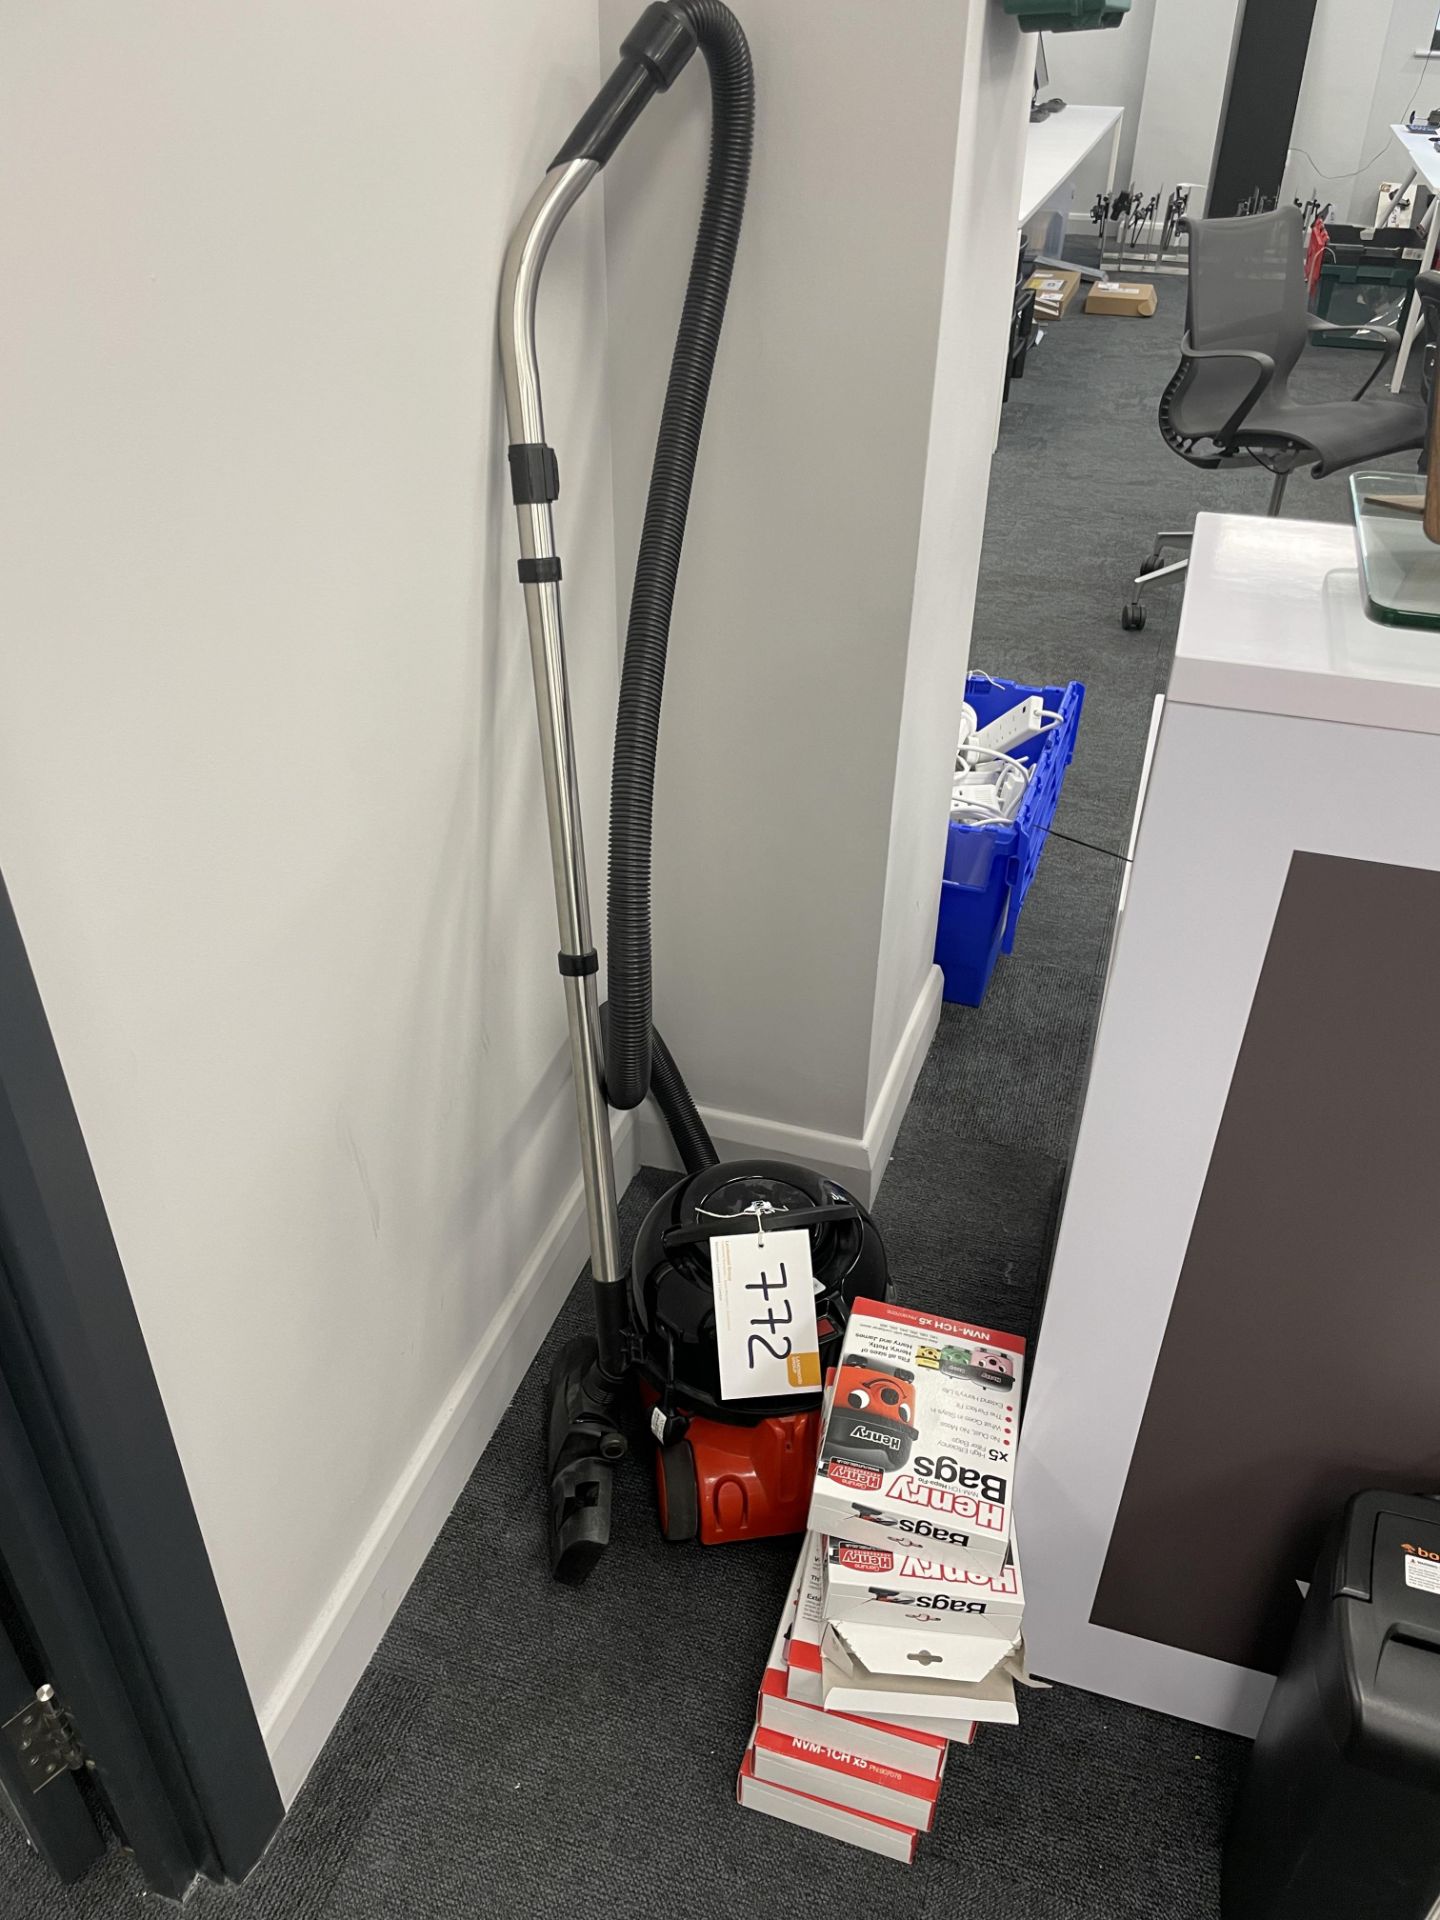 A Numatics HVR160-11 Henry type vacuum cleaner with a quantity of filter bags.